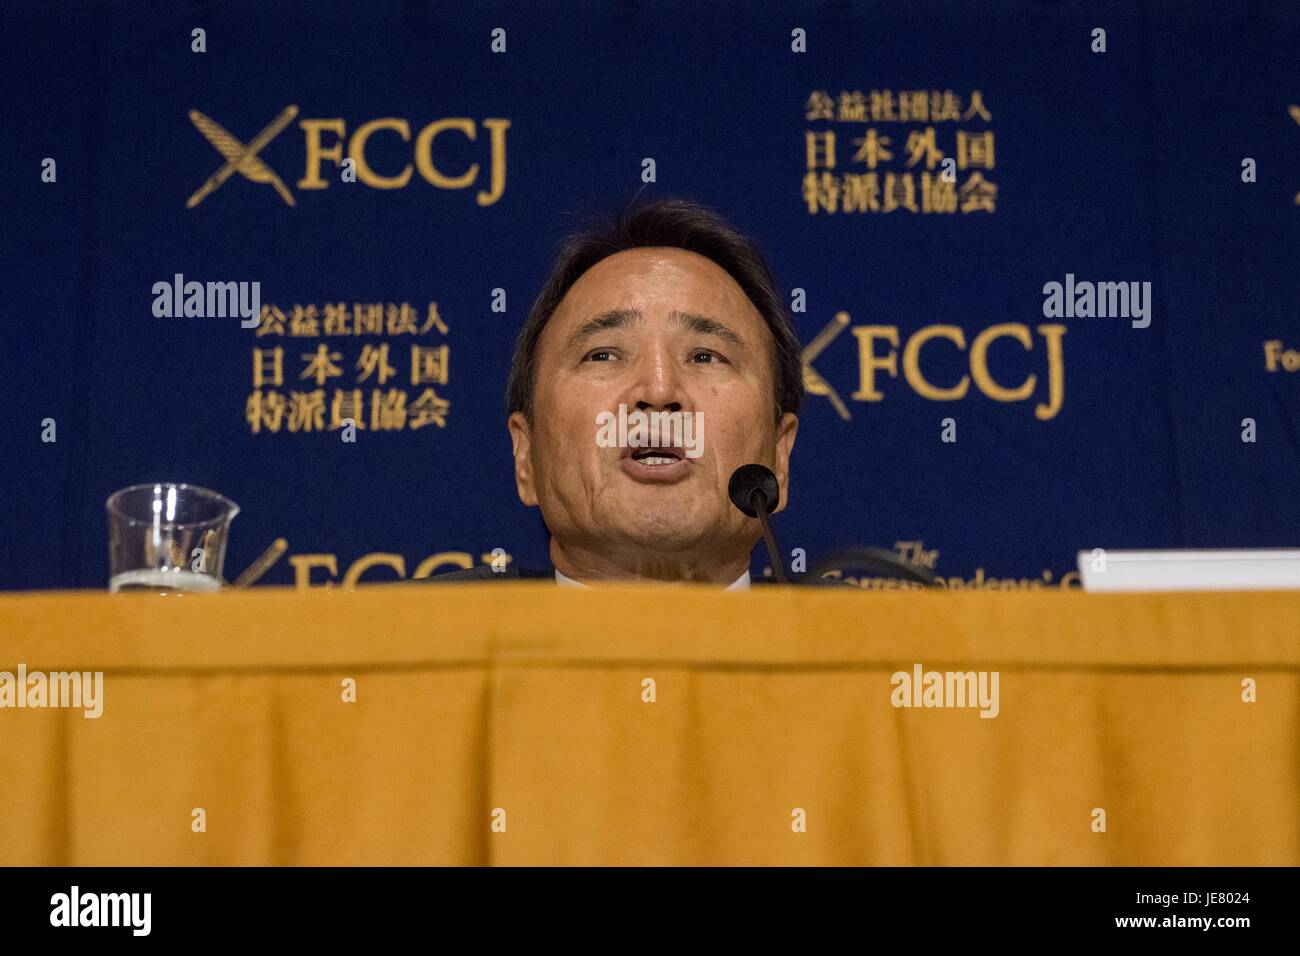 June 23, 2017 - Tokyo, Tokyo, Japan - Hiroji Yamashiro, Chairman Okinawa Peace Movement gives a response to questions during a press conference at The Foreign Correspondent Club Of Japan ( FCCJ ) in Tokyo. In March, Japanese police released Hiroji Yamashiro, a retired civil servant, after 152 days in detention. His initial arrest was for damaging a wire fence around an American military base; he was subsequently charged with other offenses. For years, Yamashiro (65) was the jovial ringleader of protests against the heavy US military footprint on Okinawa, Japan's southernmost prefecture. Yamash Stock Photo